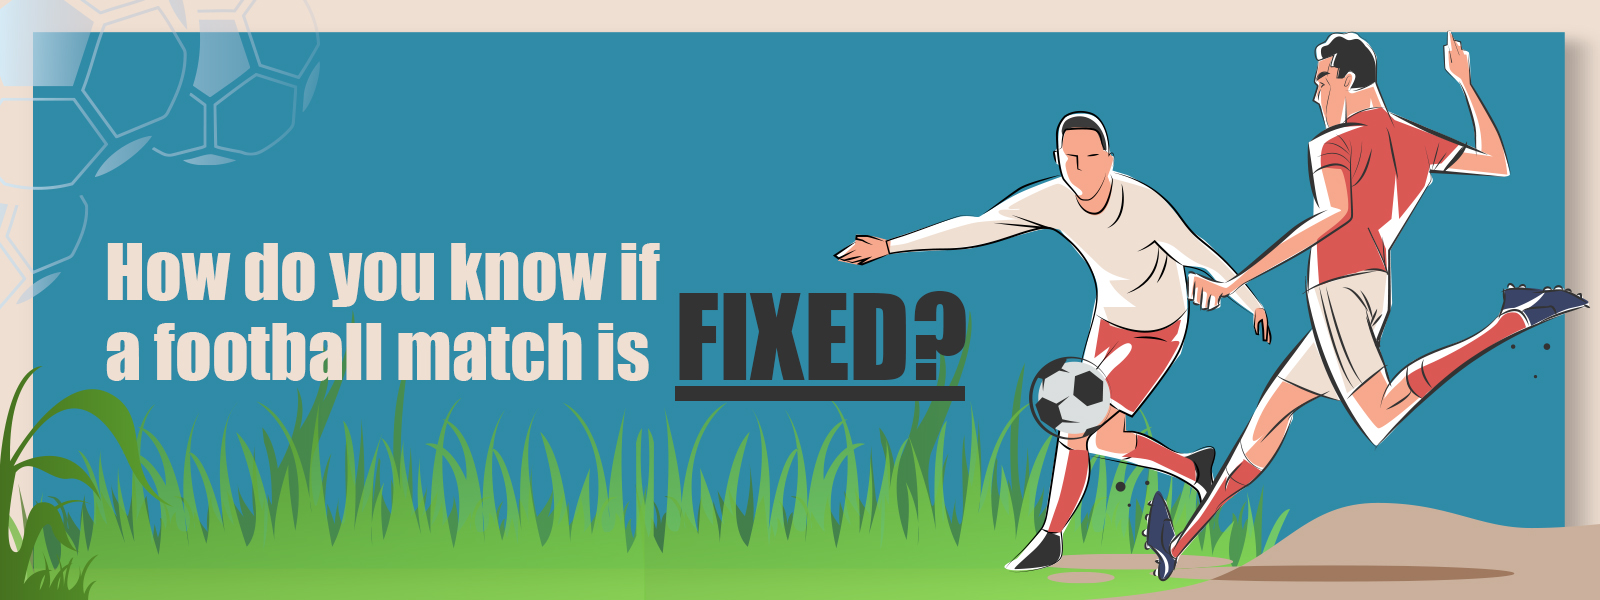 How Do You Know If a Football Match Is Fixed?